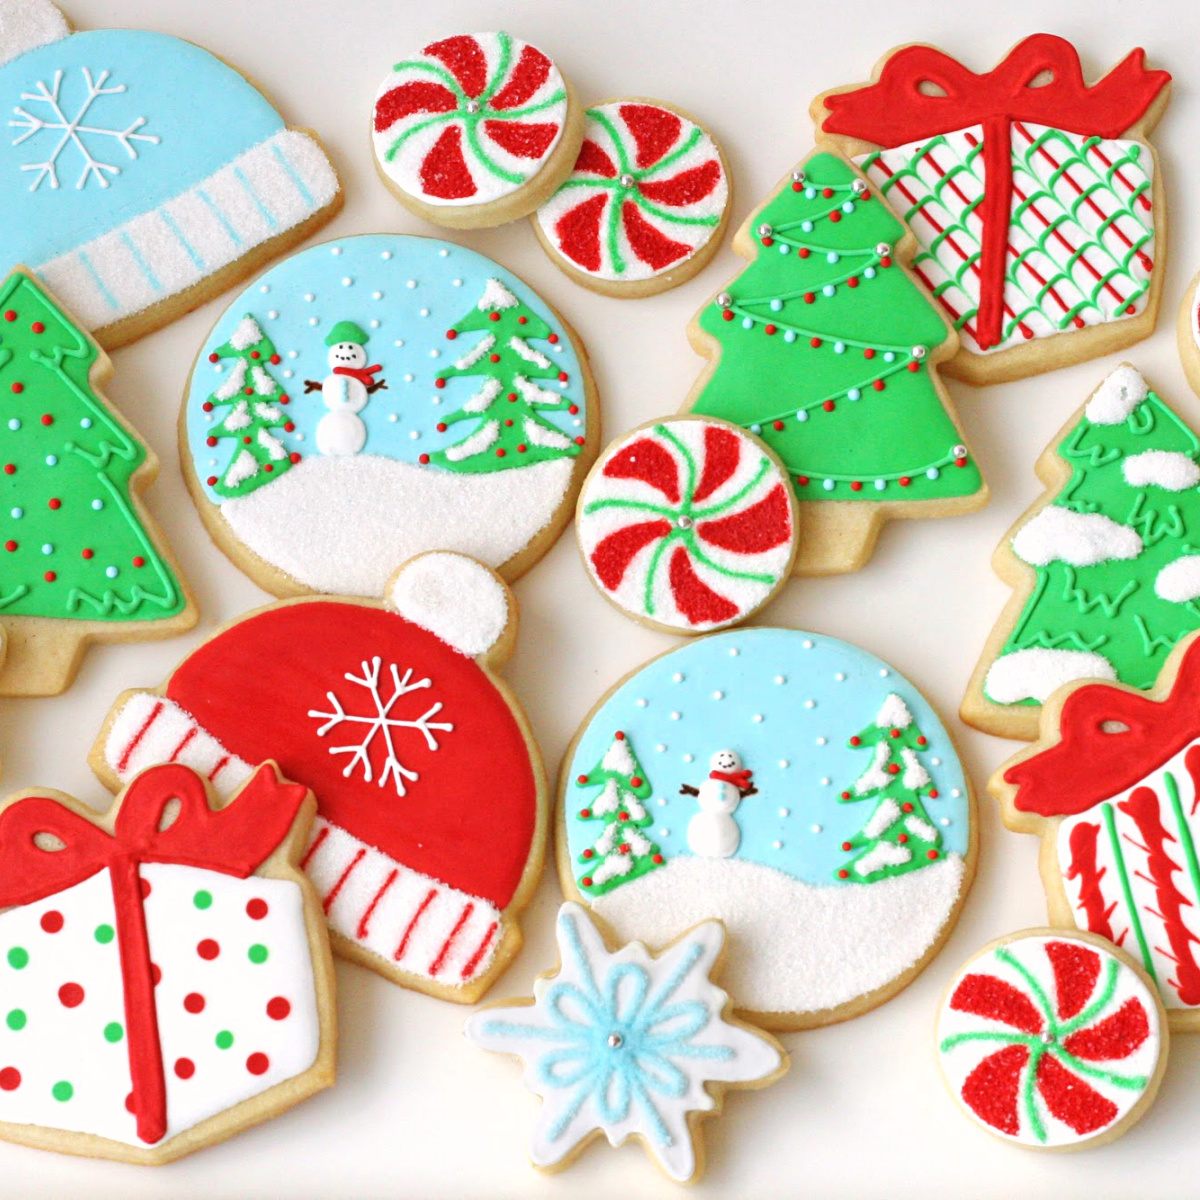 Decorating Sugar Cookies From Start to Finish- Part 2 - Glorious Treats